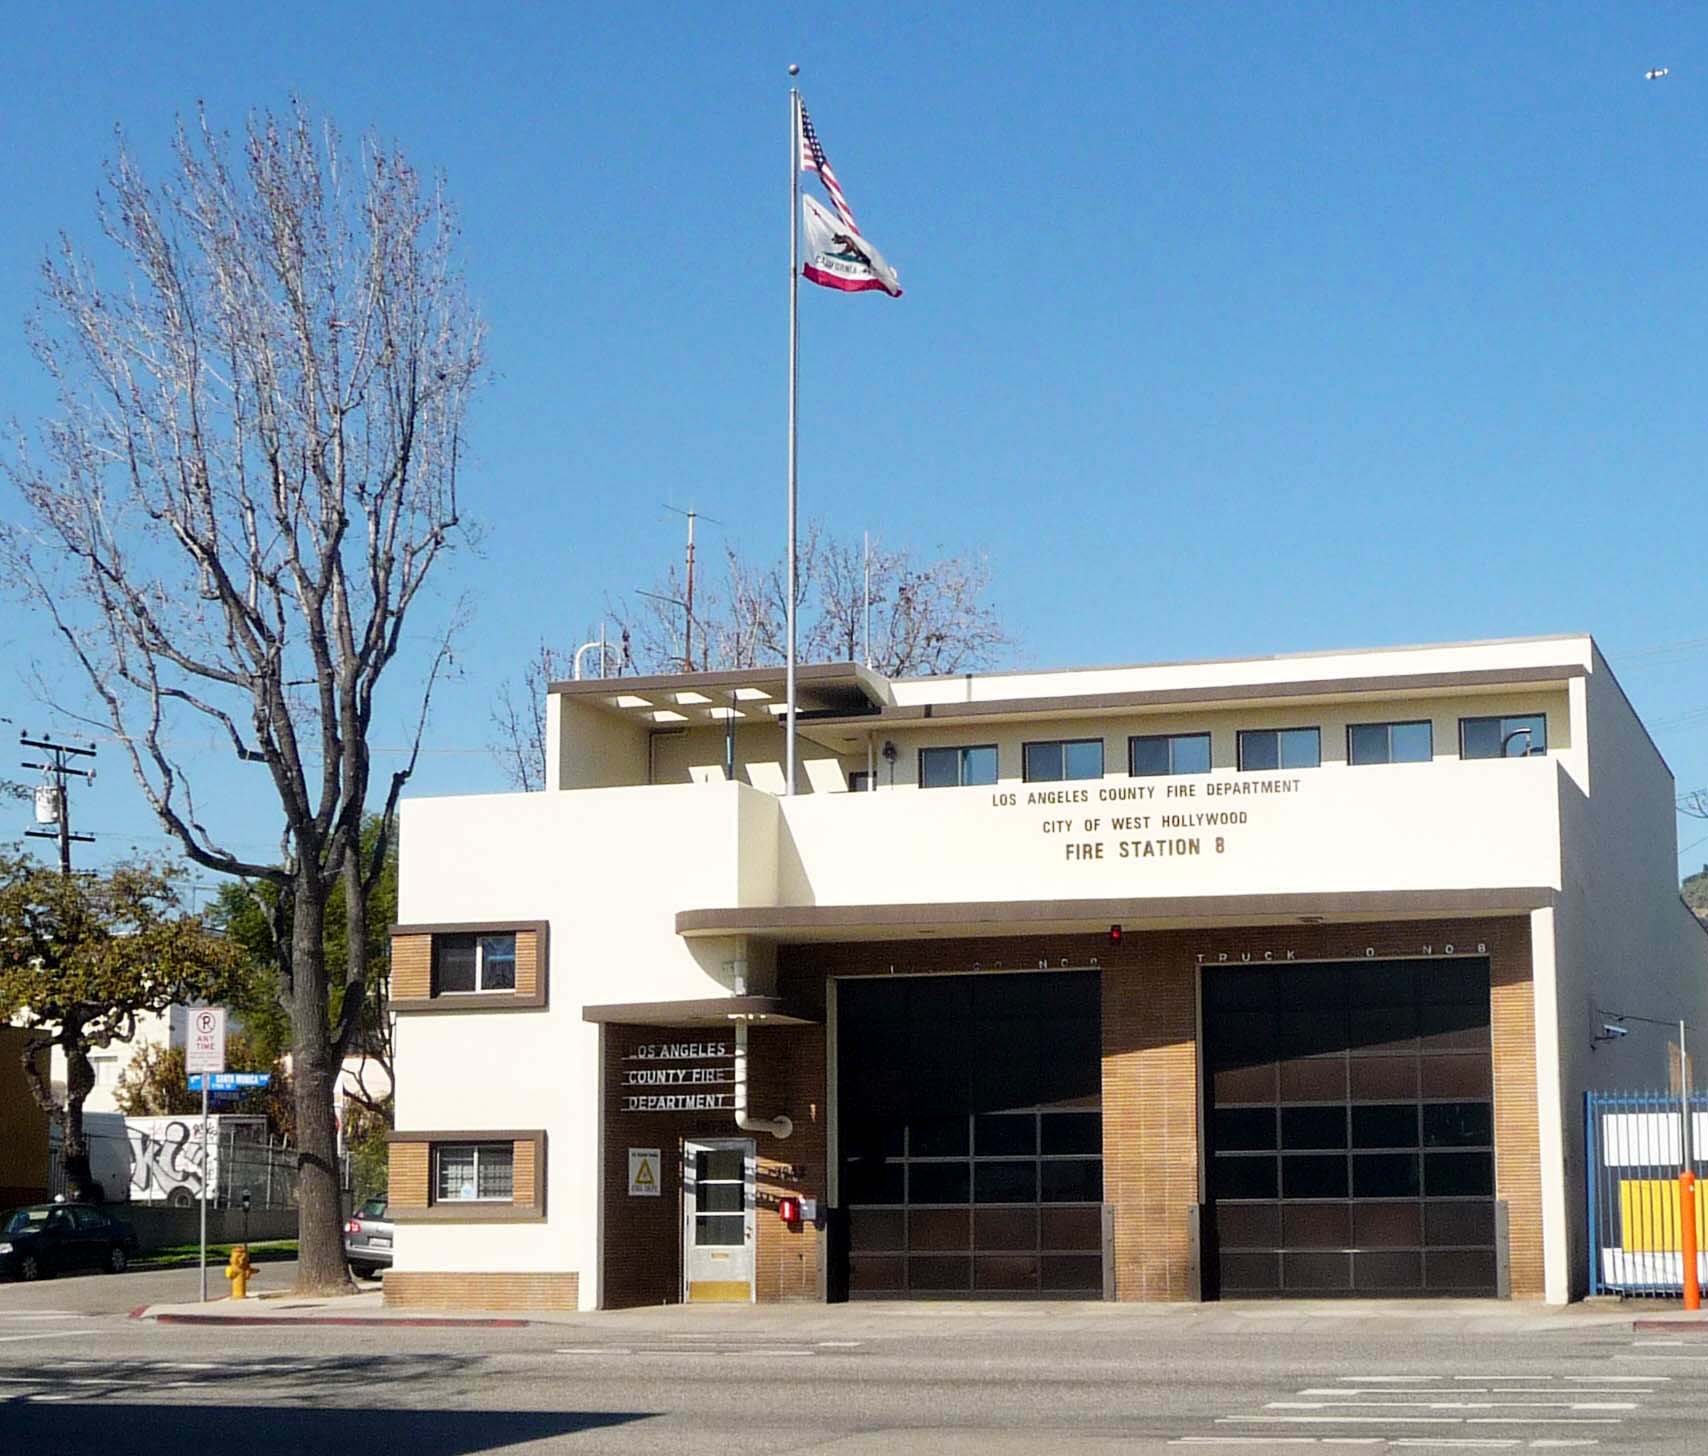 City of West Hollywood Fire Station